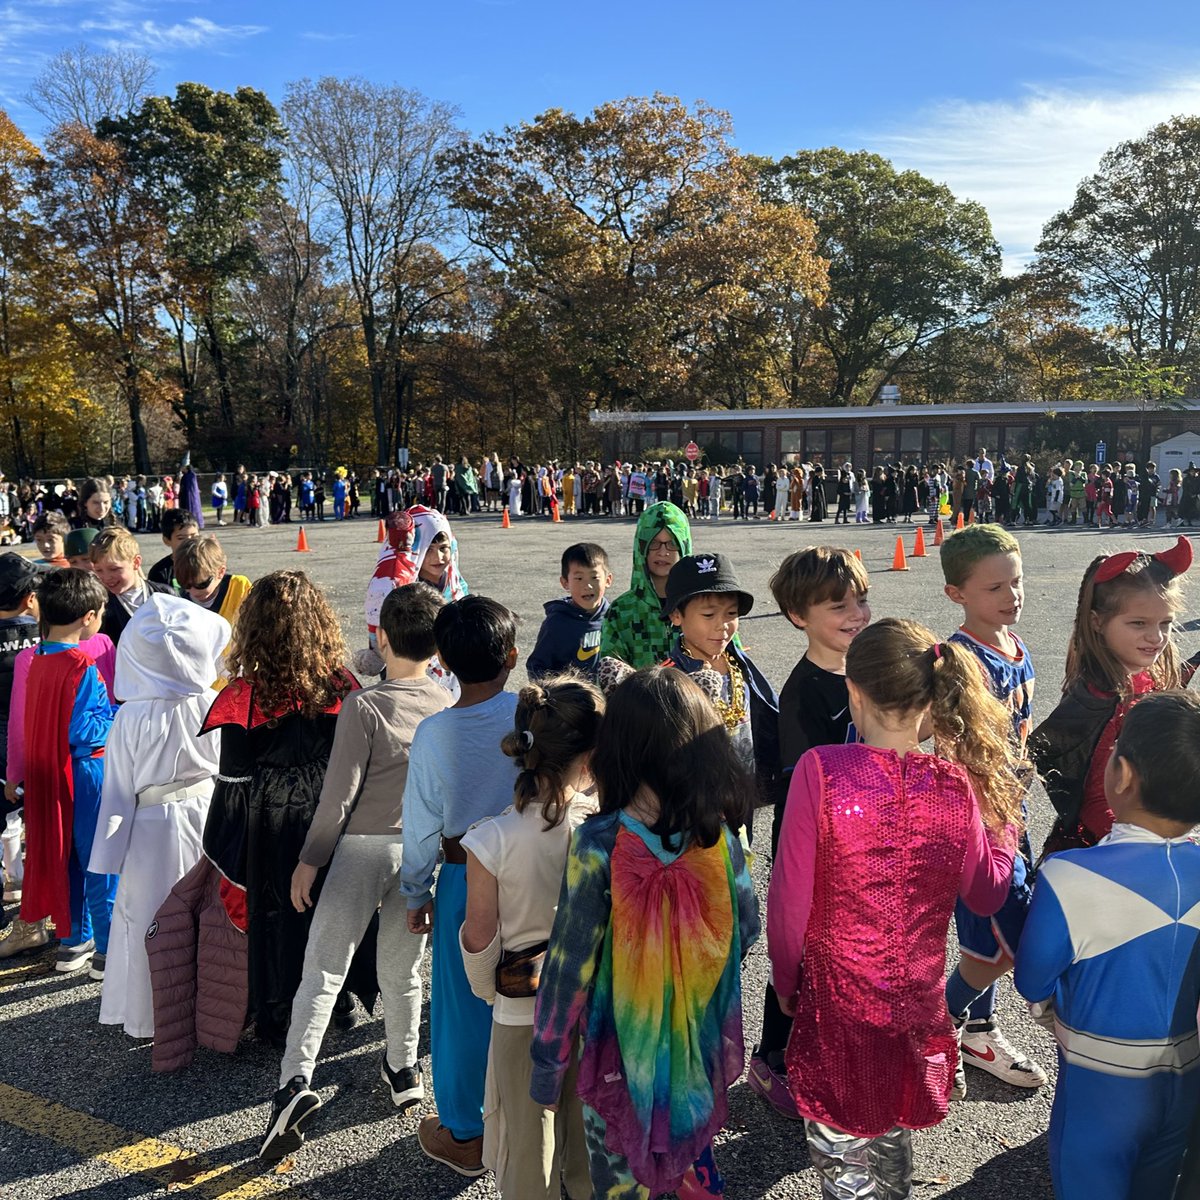 First grade is the place to be on Halloween! #WeAreChappaqua #RBpride